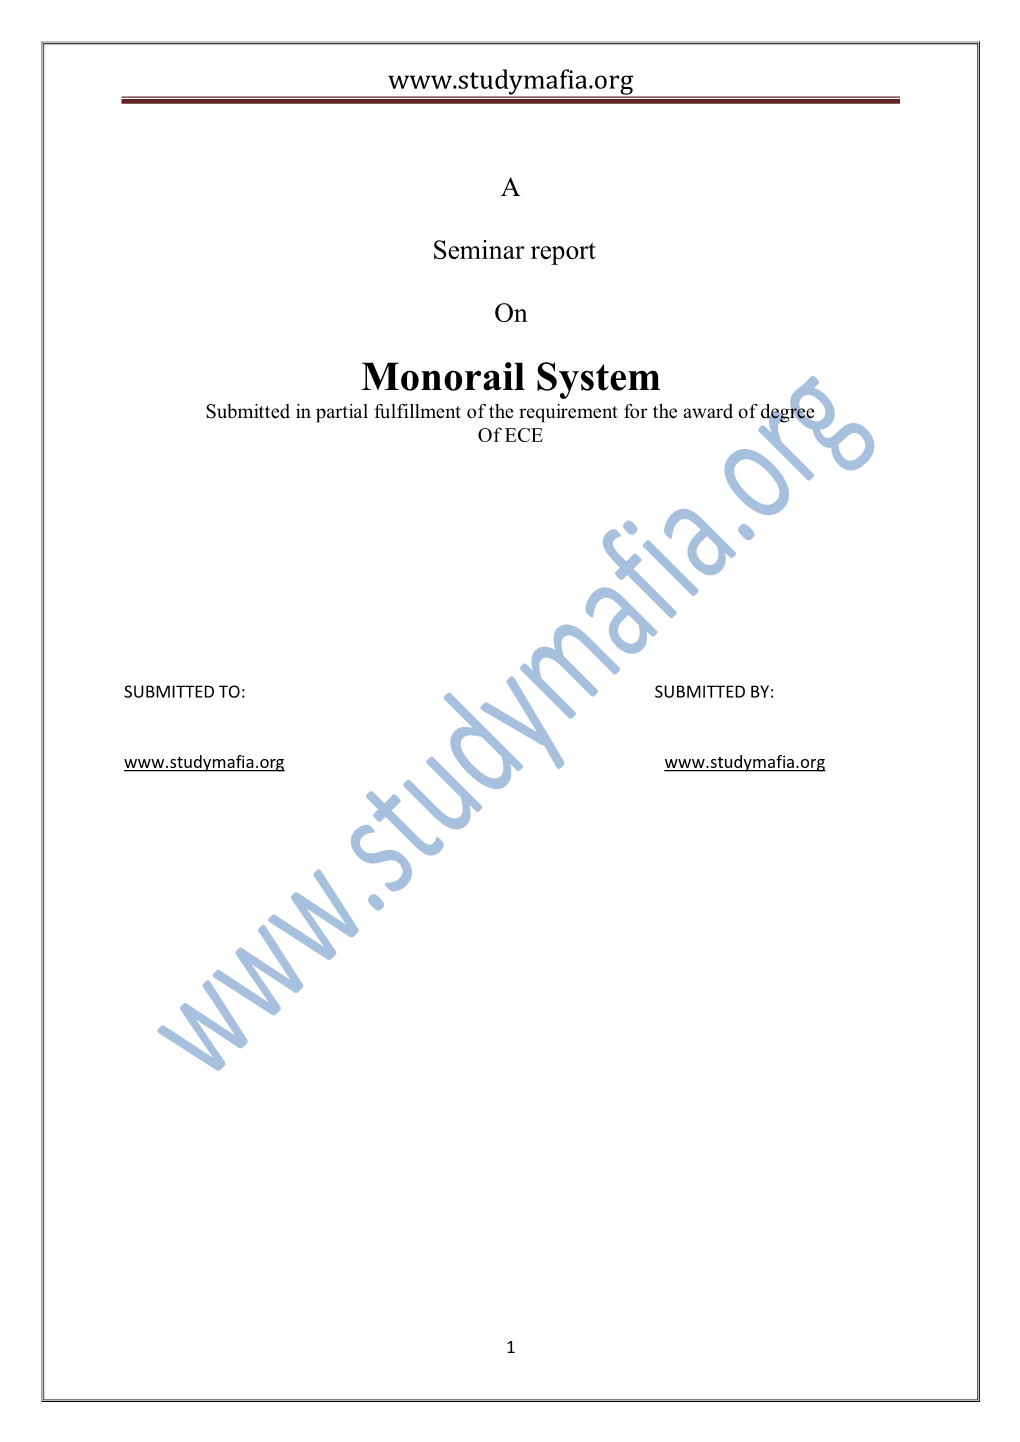 Monorail System Submitted in Partial Fulfillment of the Requirement for the Award of Degree of ECE